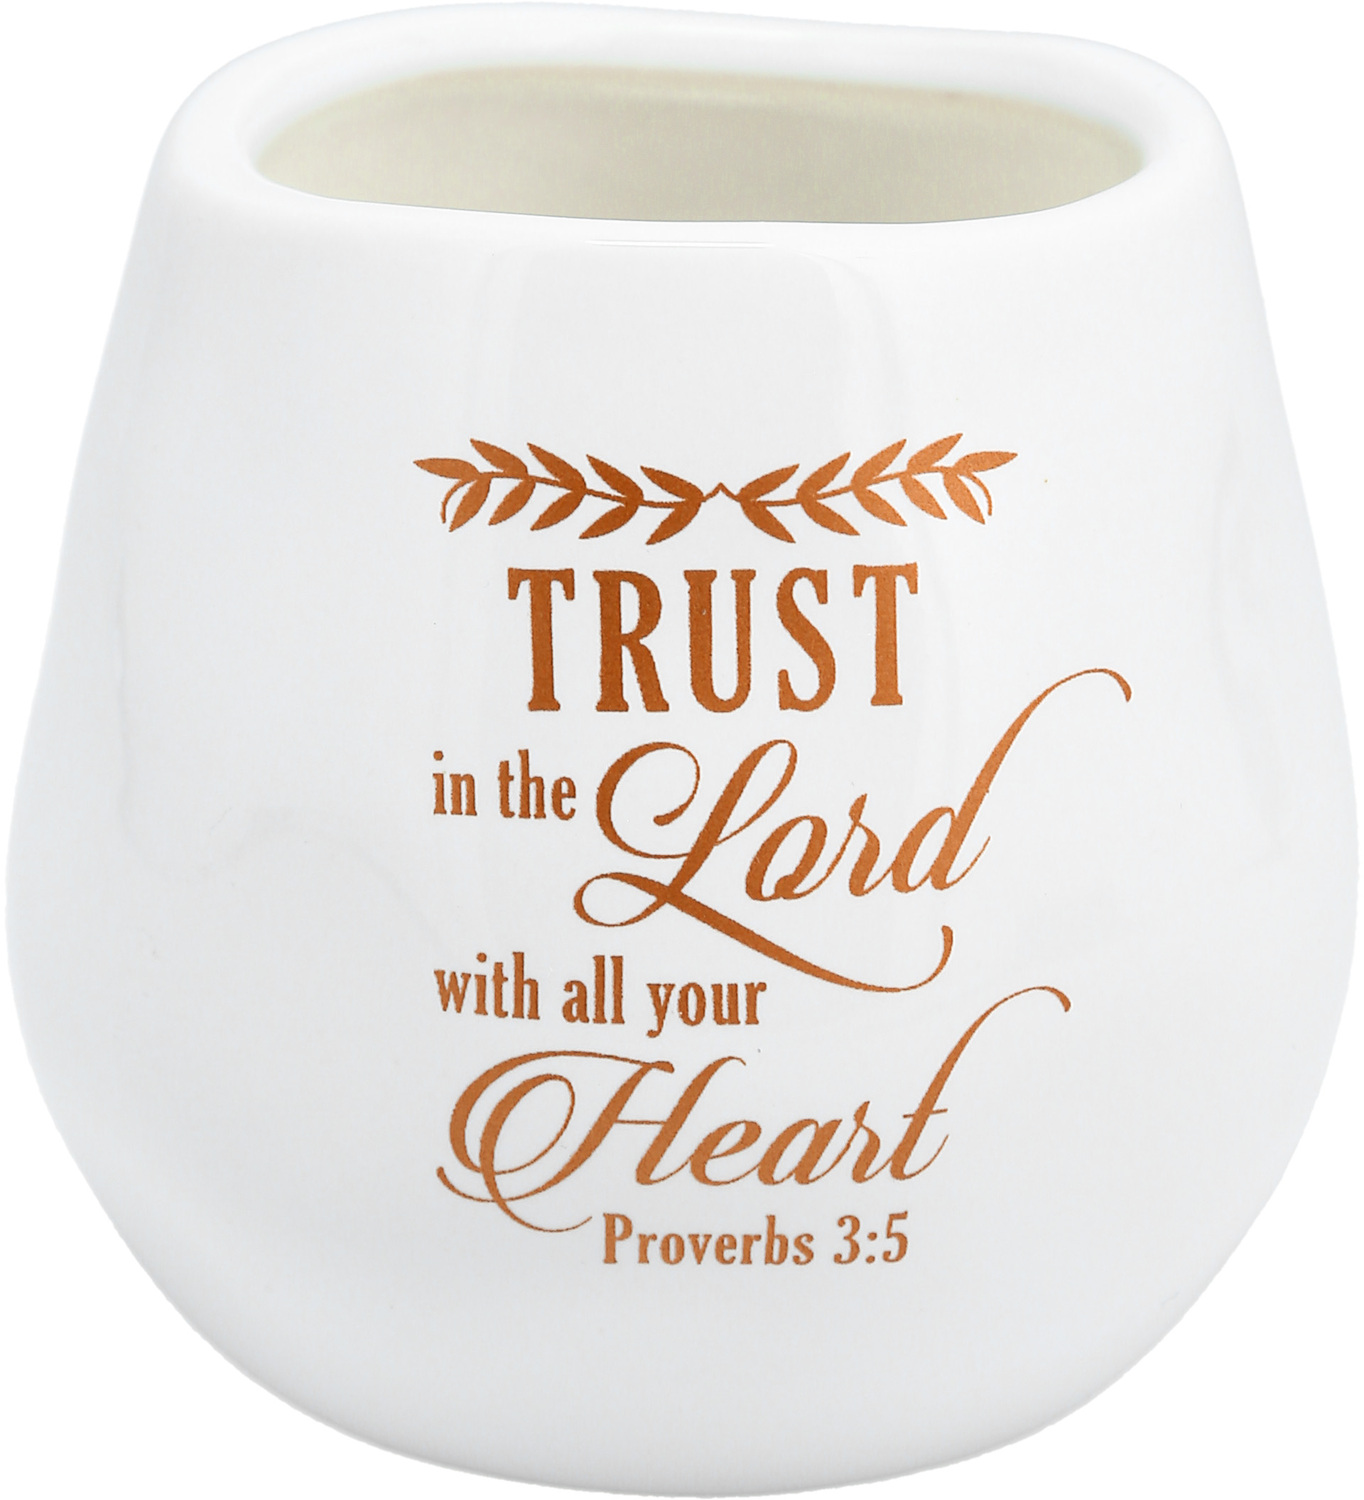 Lord by Blessed by You - Lord - 8 oz - 100% Soy Wax Candle
Scent: Serenity